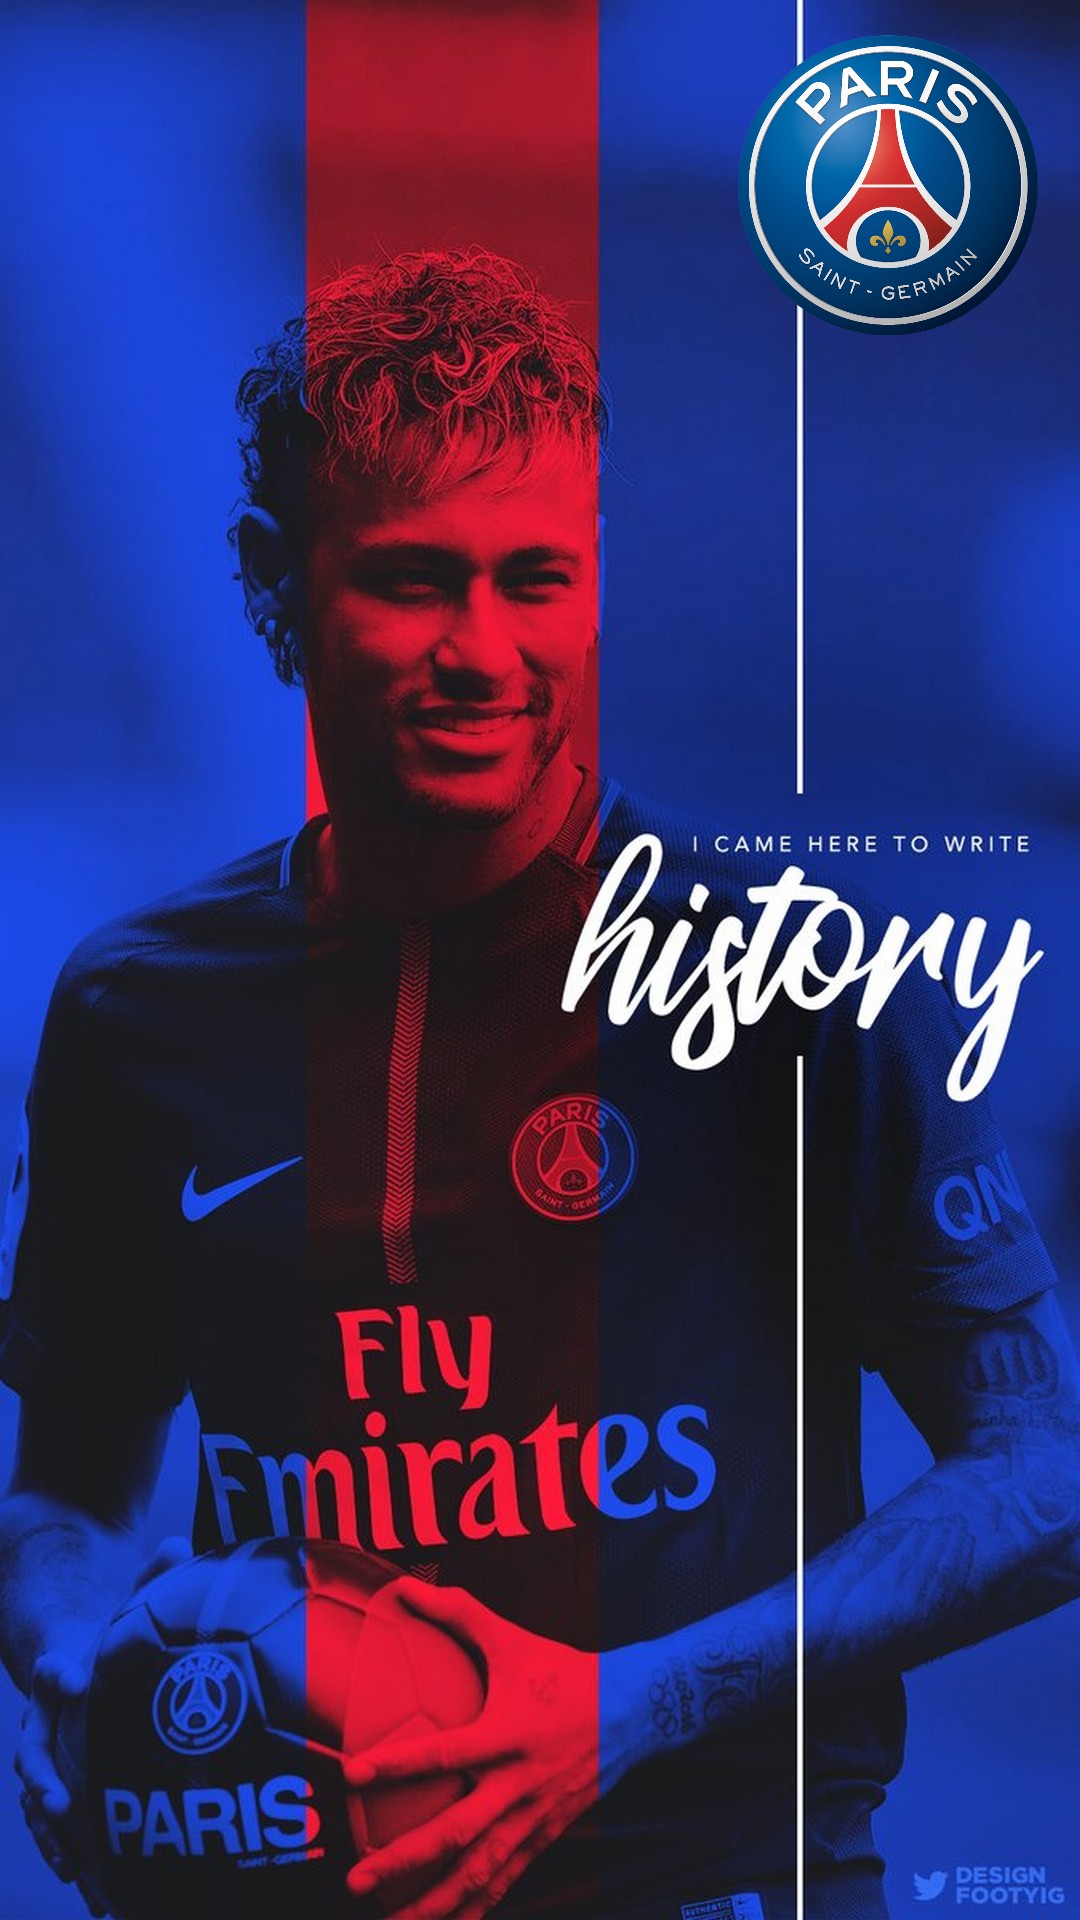 Neymar PSG HD Wallpaper For iPhone With Resolution 1080X1920 pixel. You can make this wallpaper for your Mac or Windows Desktop Background, iPhone, Android or Tablet and another Smartphone device for free